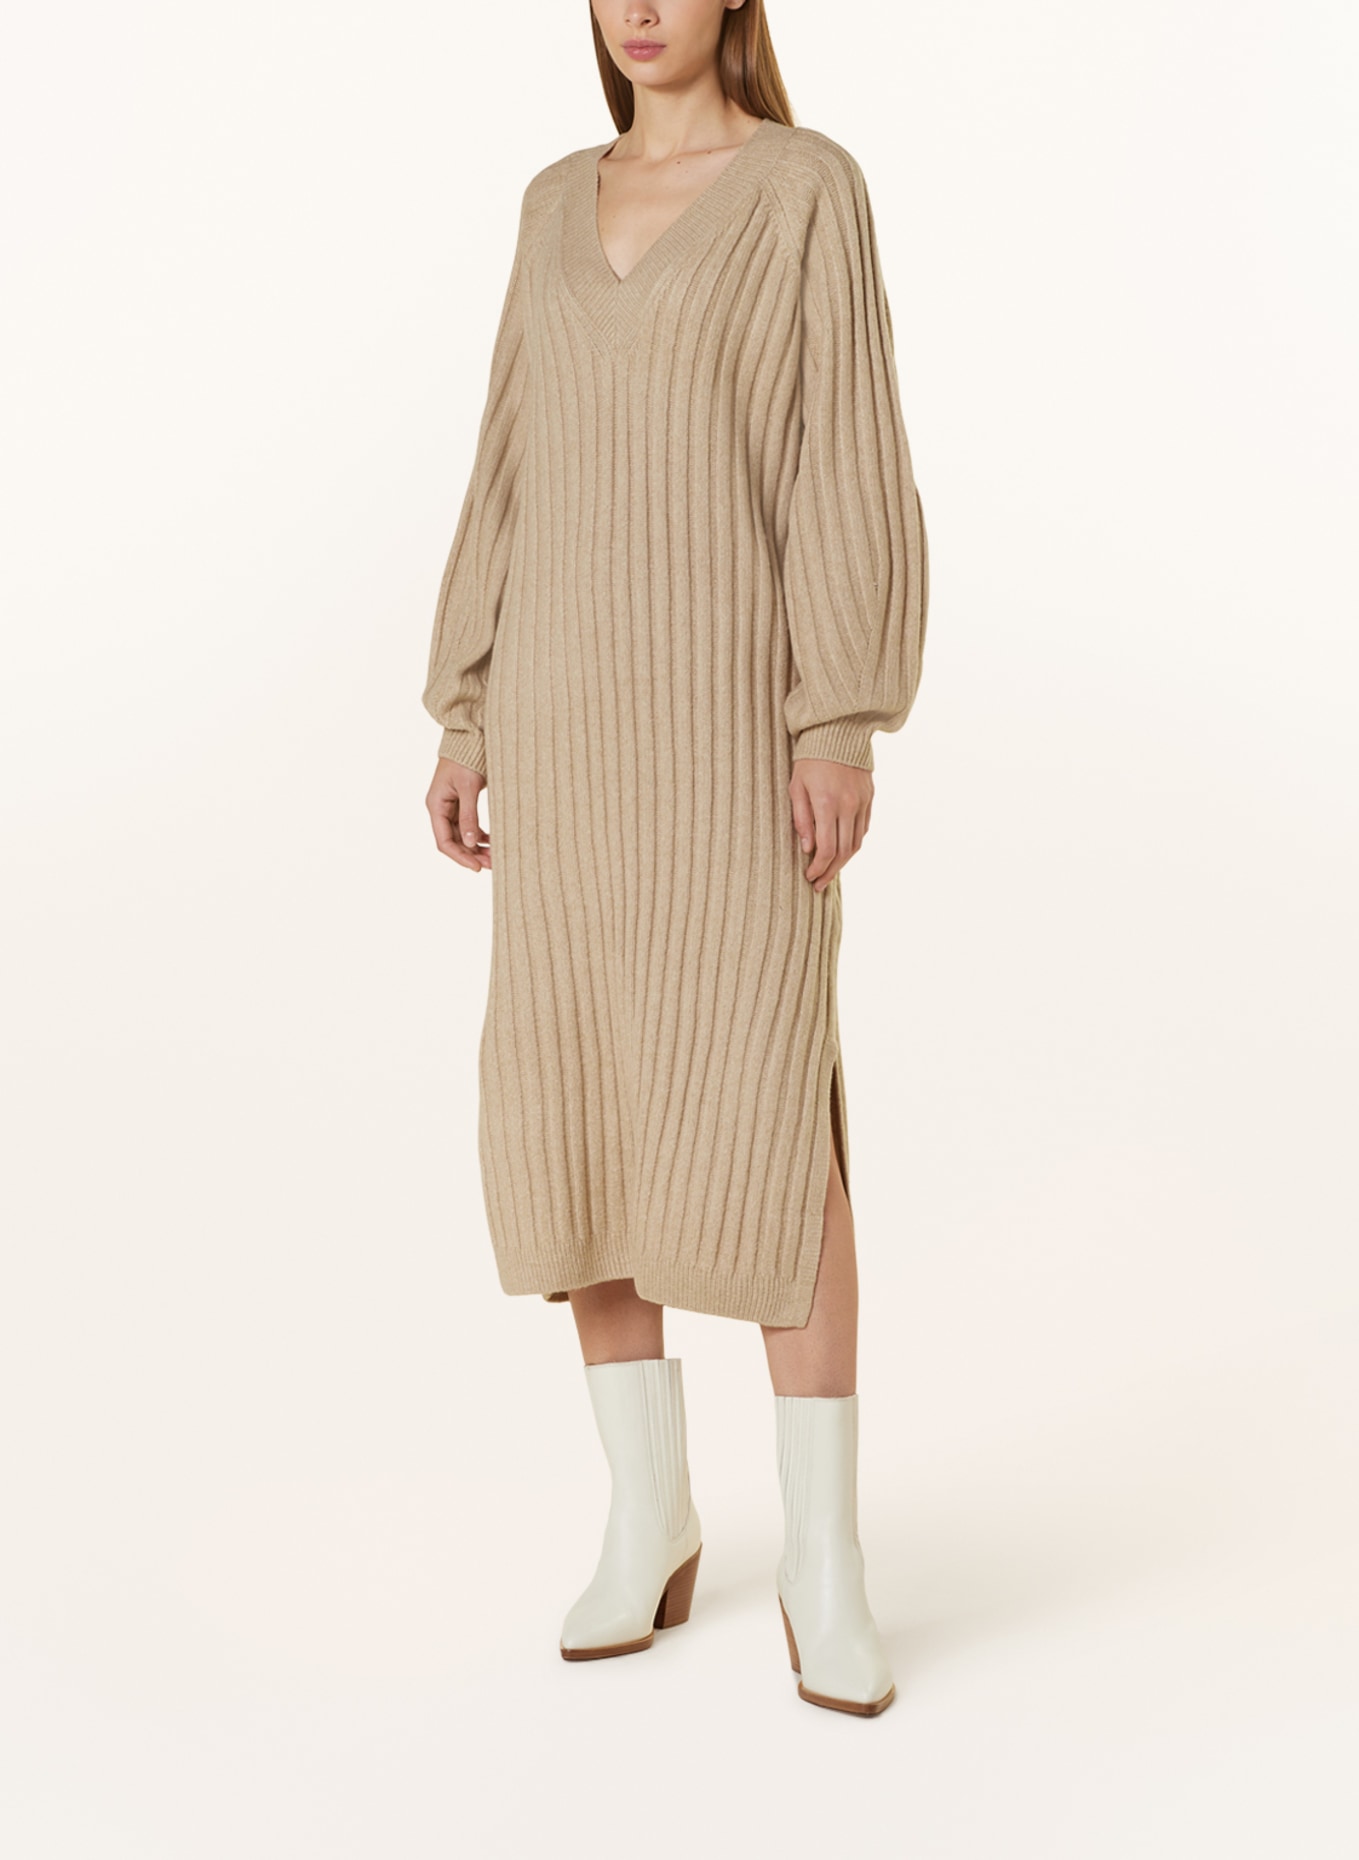 gina tricot Knit dress, Color: LIGHT BROWN (Image 2)